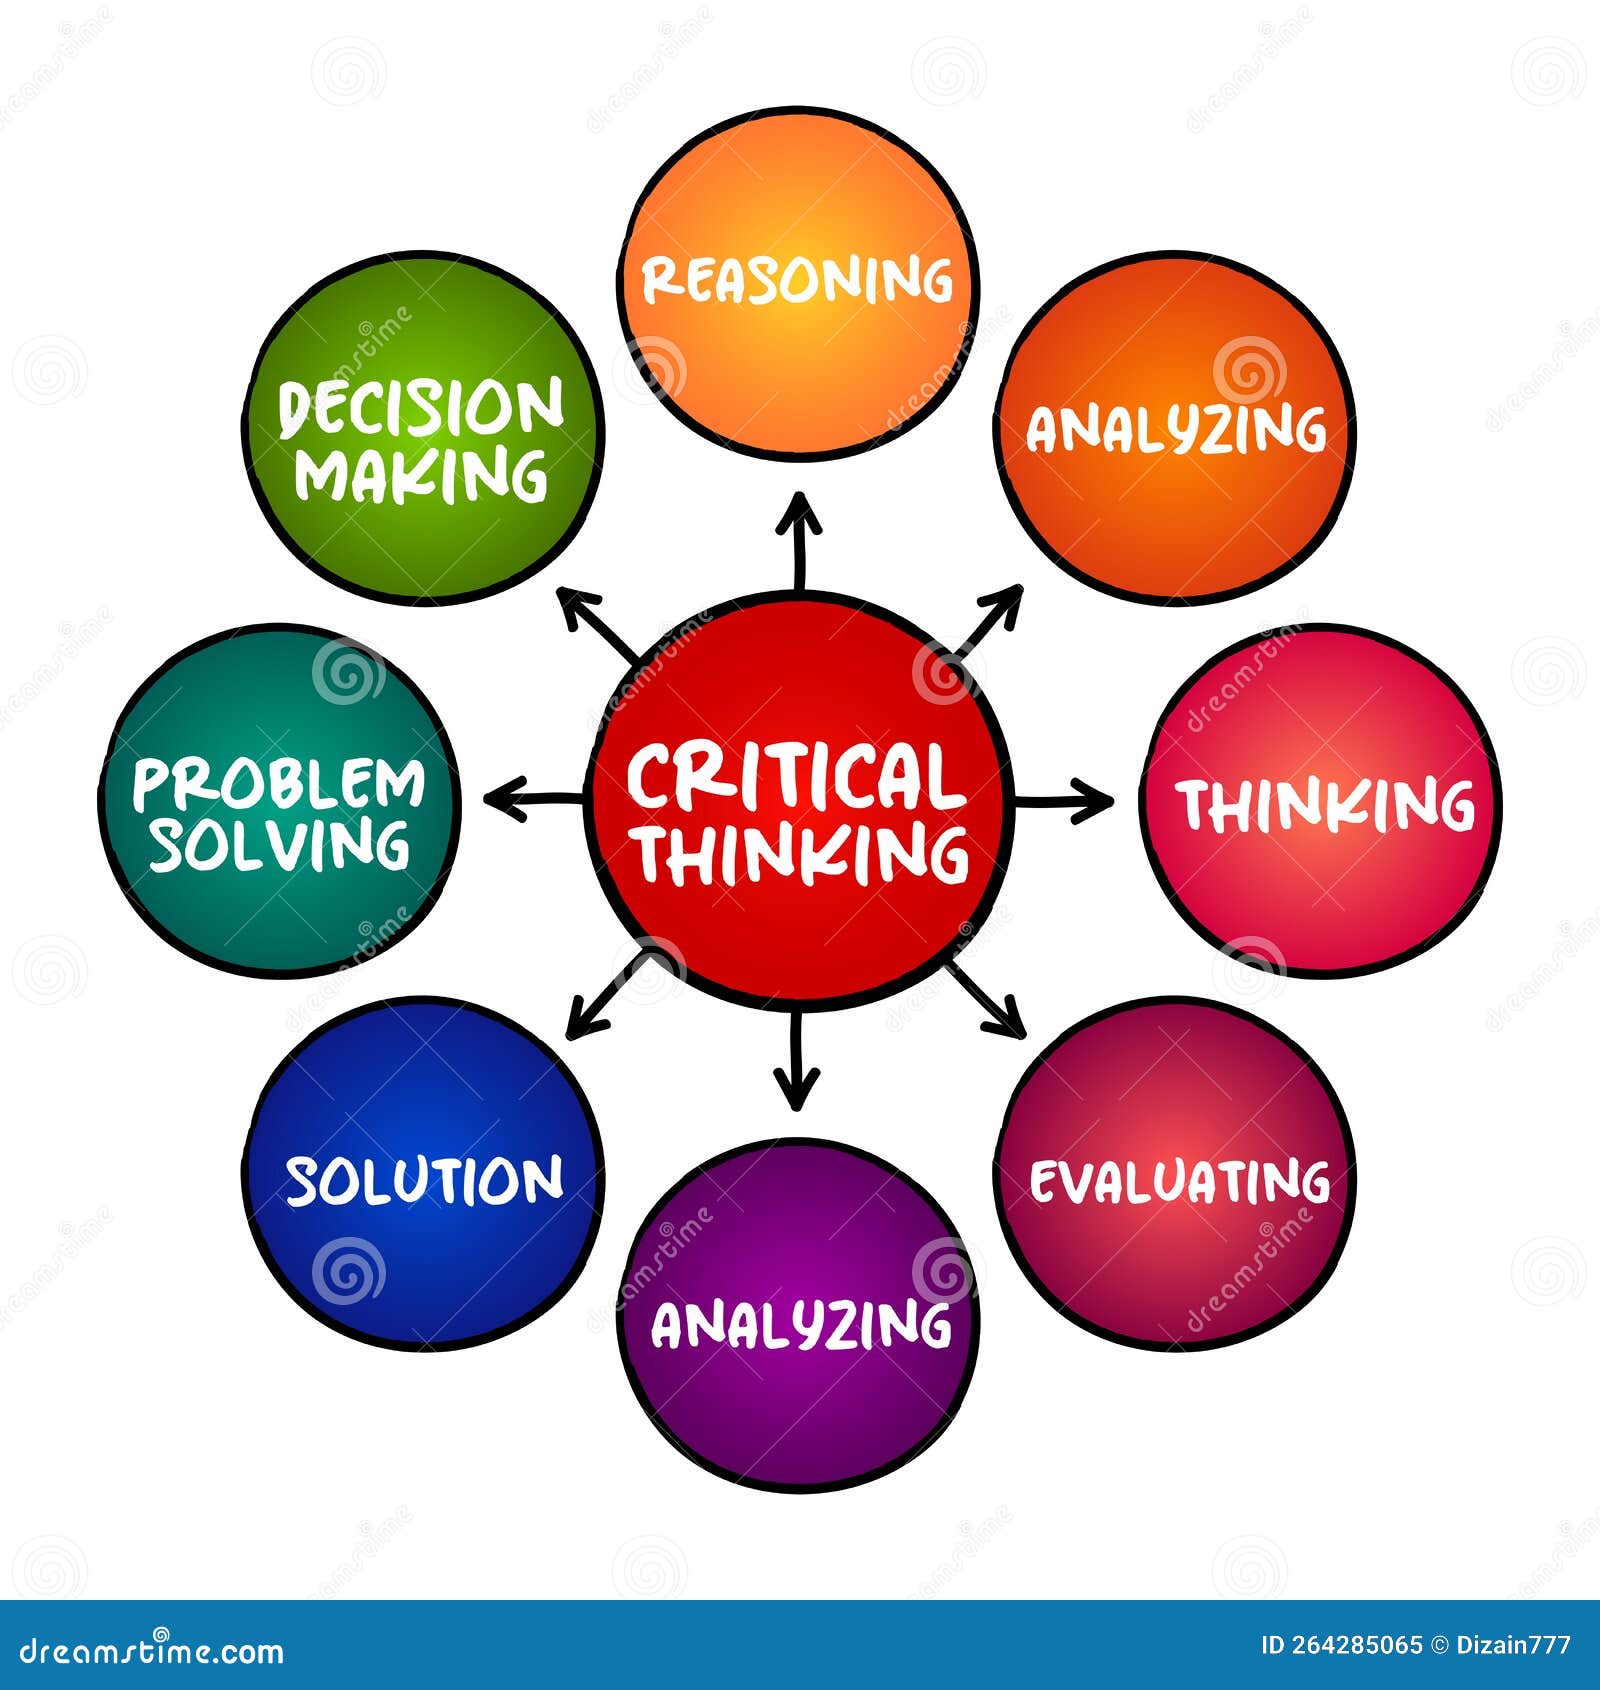 critical thinking is purposeful judgment which results in